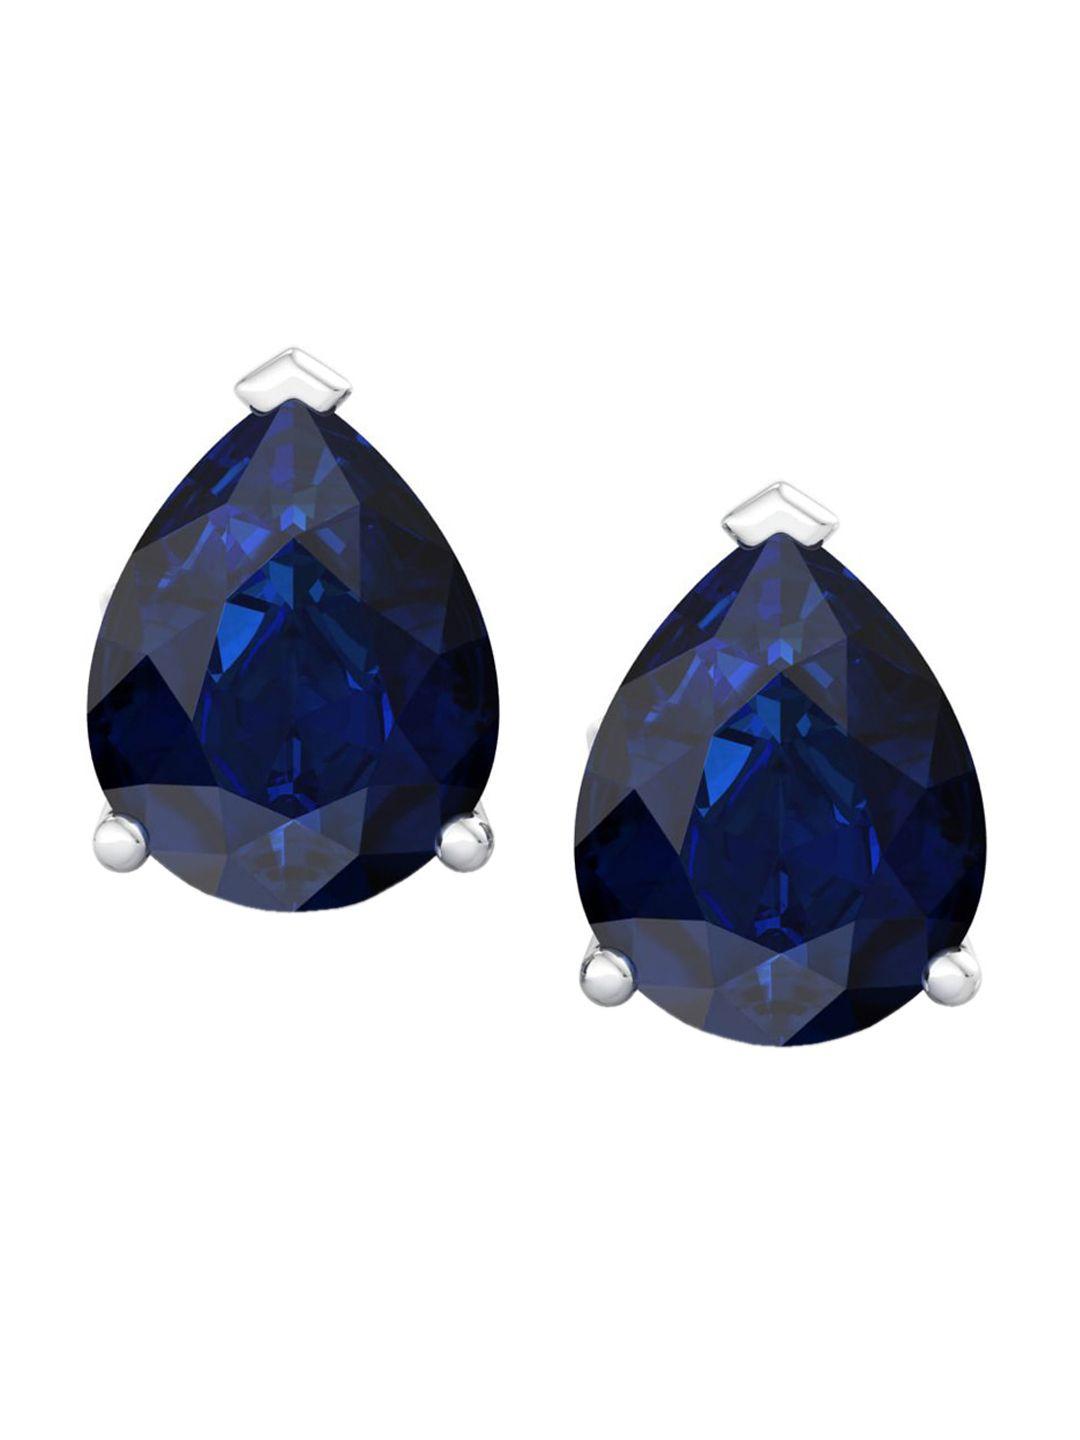 inddus jewels rhodium-plated 925 sterling silver tear drop shaped studs earrings